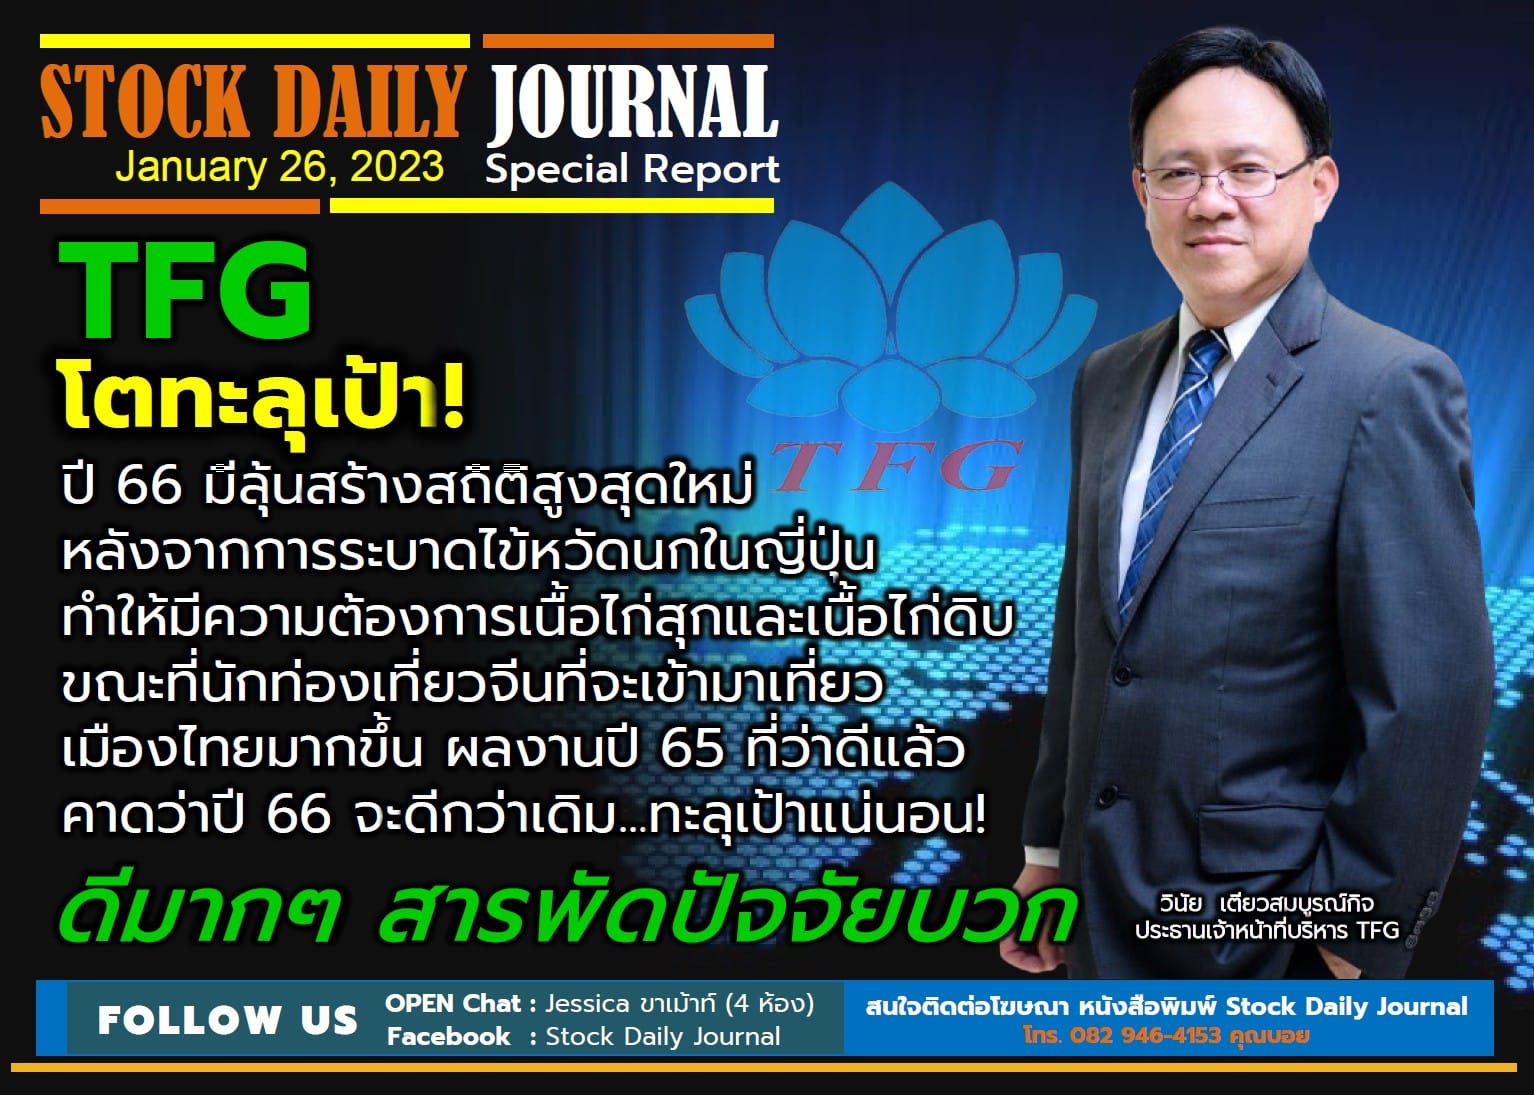 STOCK DAILY JOURNAL “Special Report : TFG”